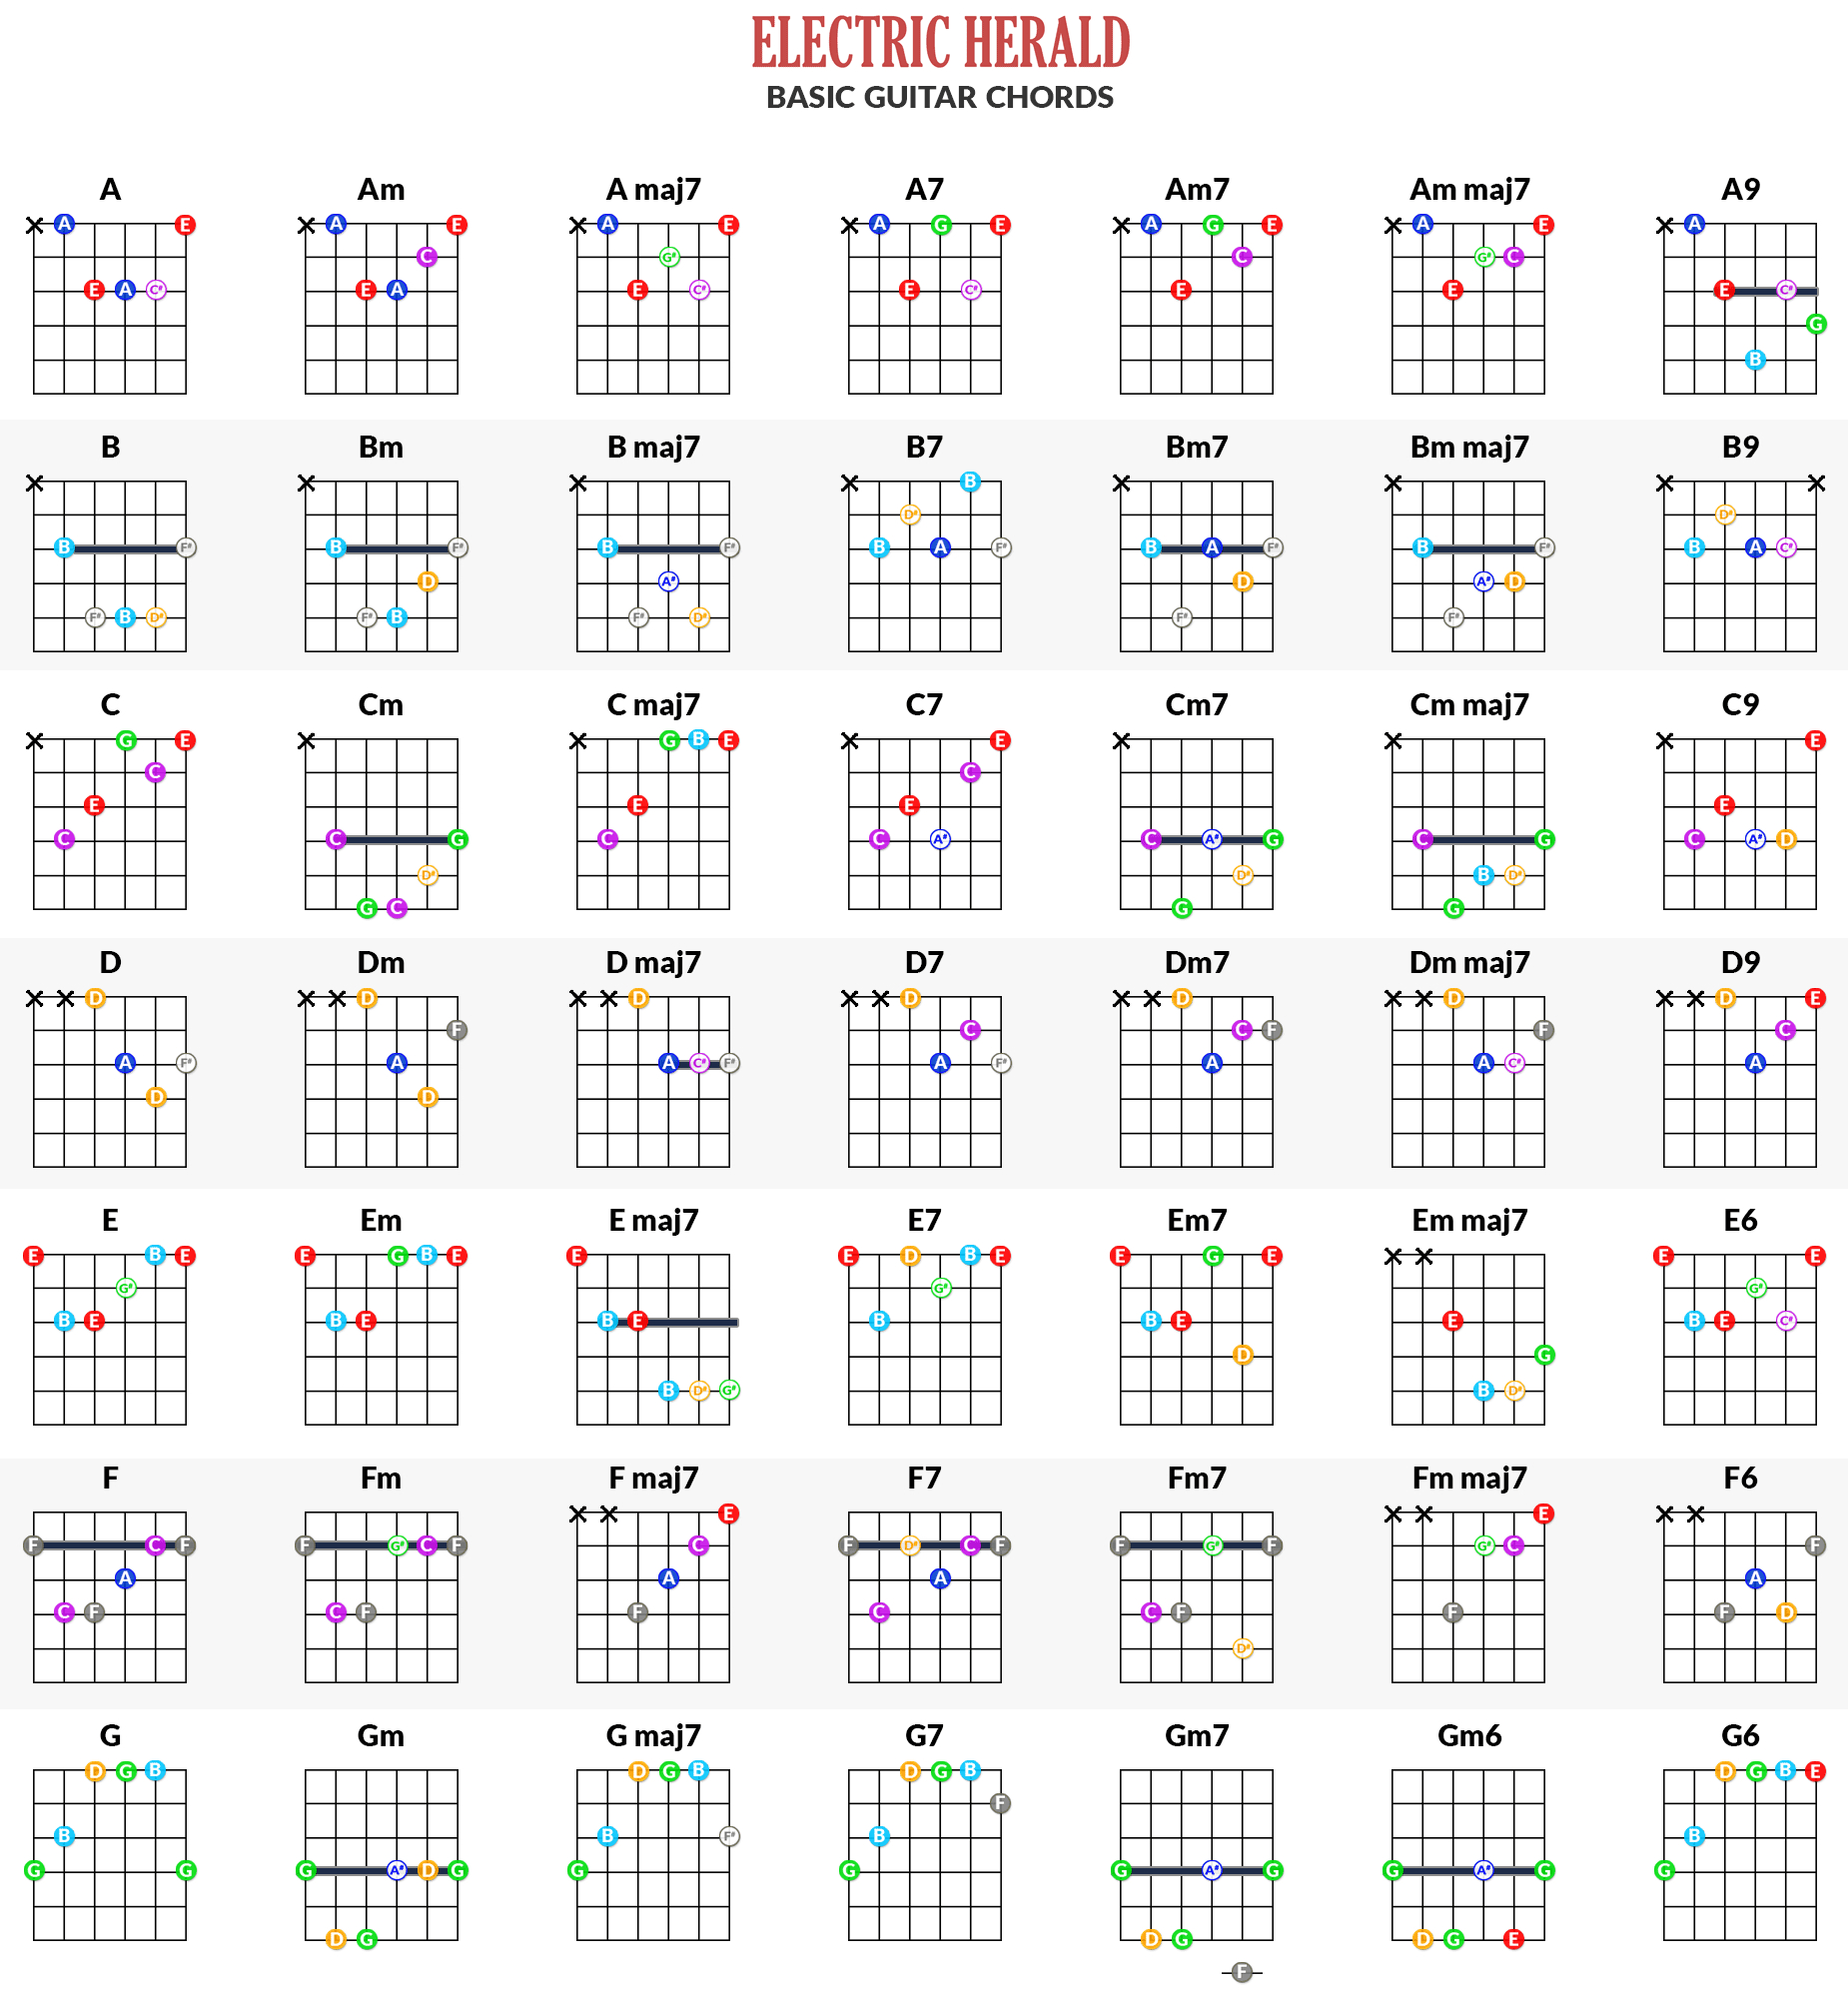 Chords For Guitar Online Guitar Chords Chart Free App Electric Herald